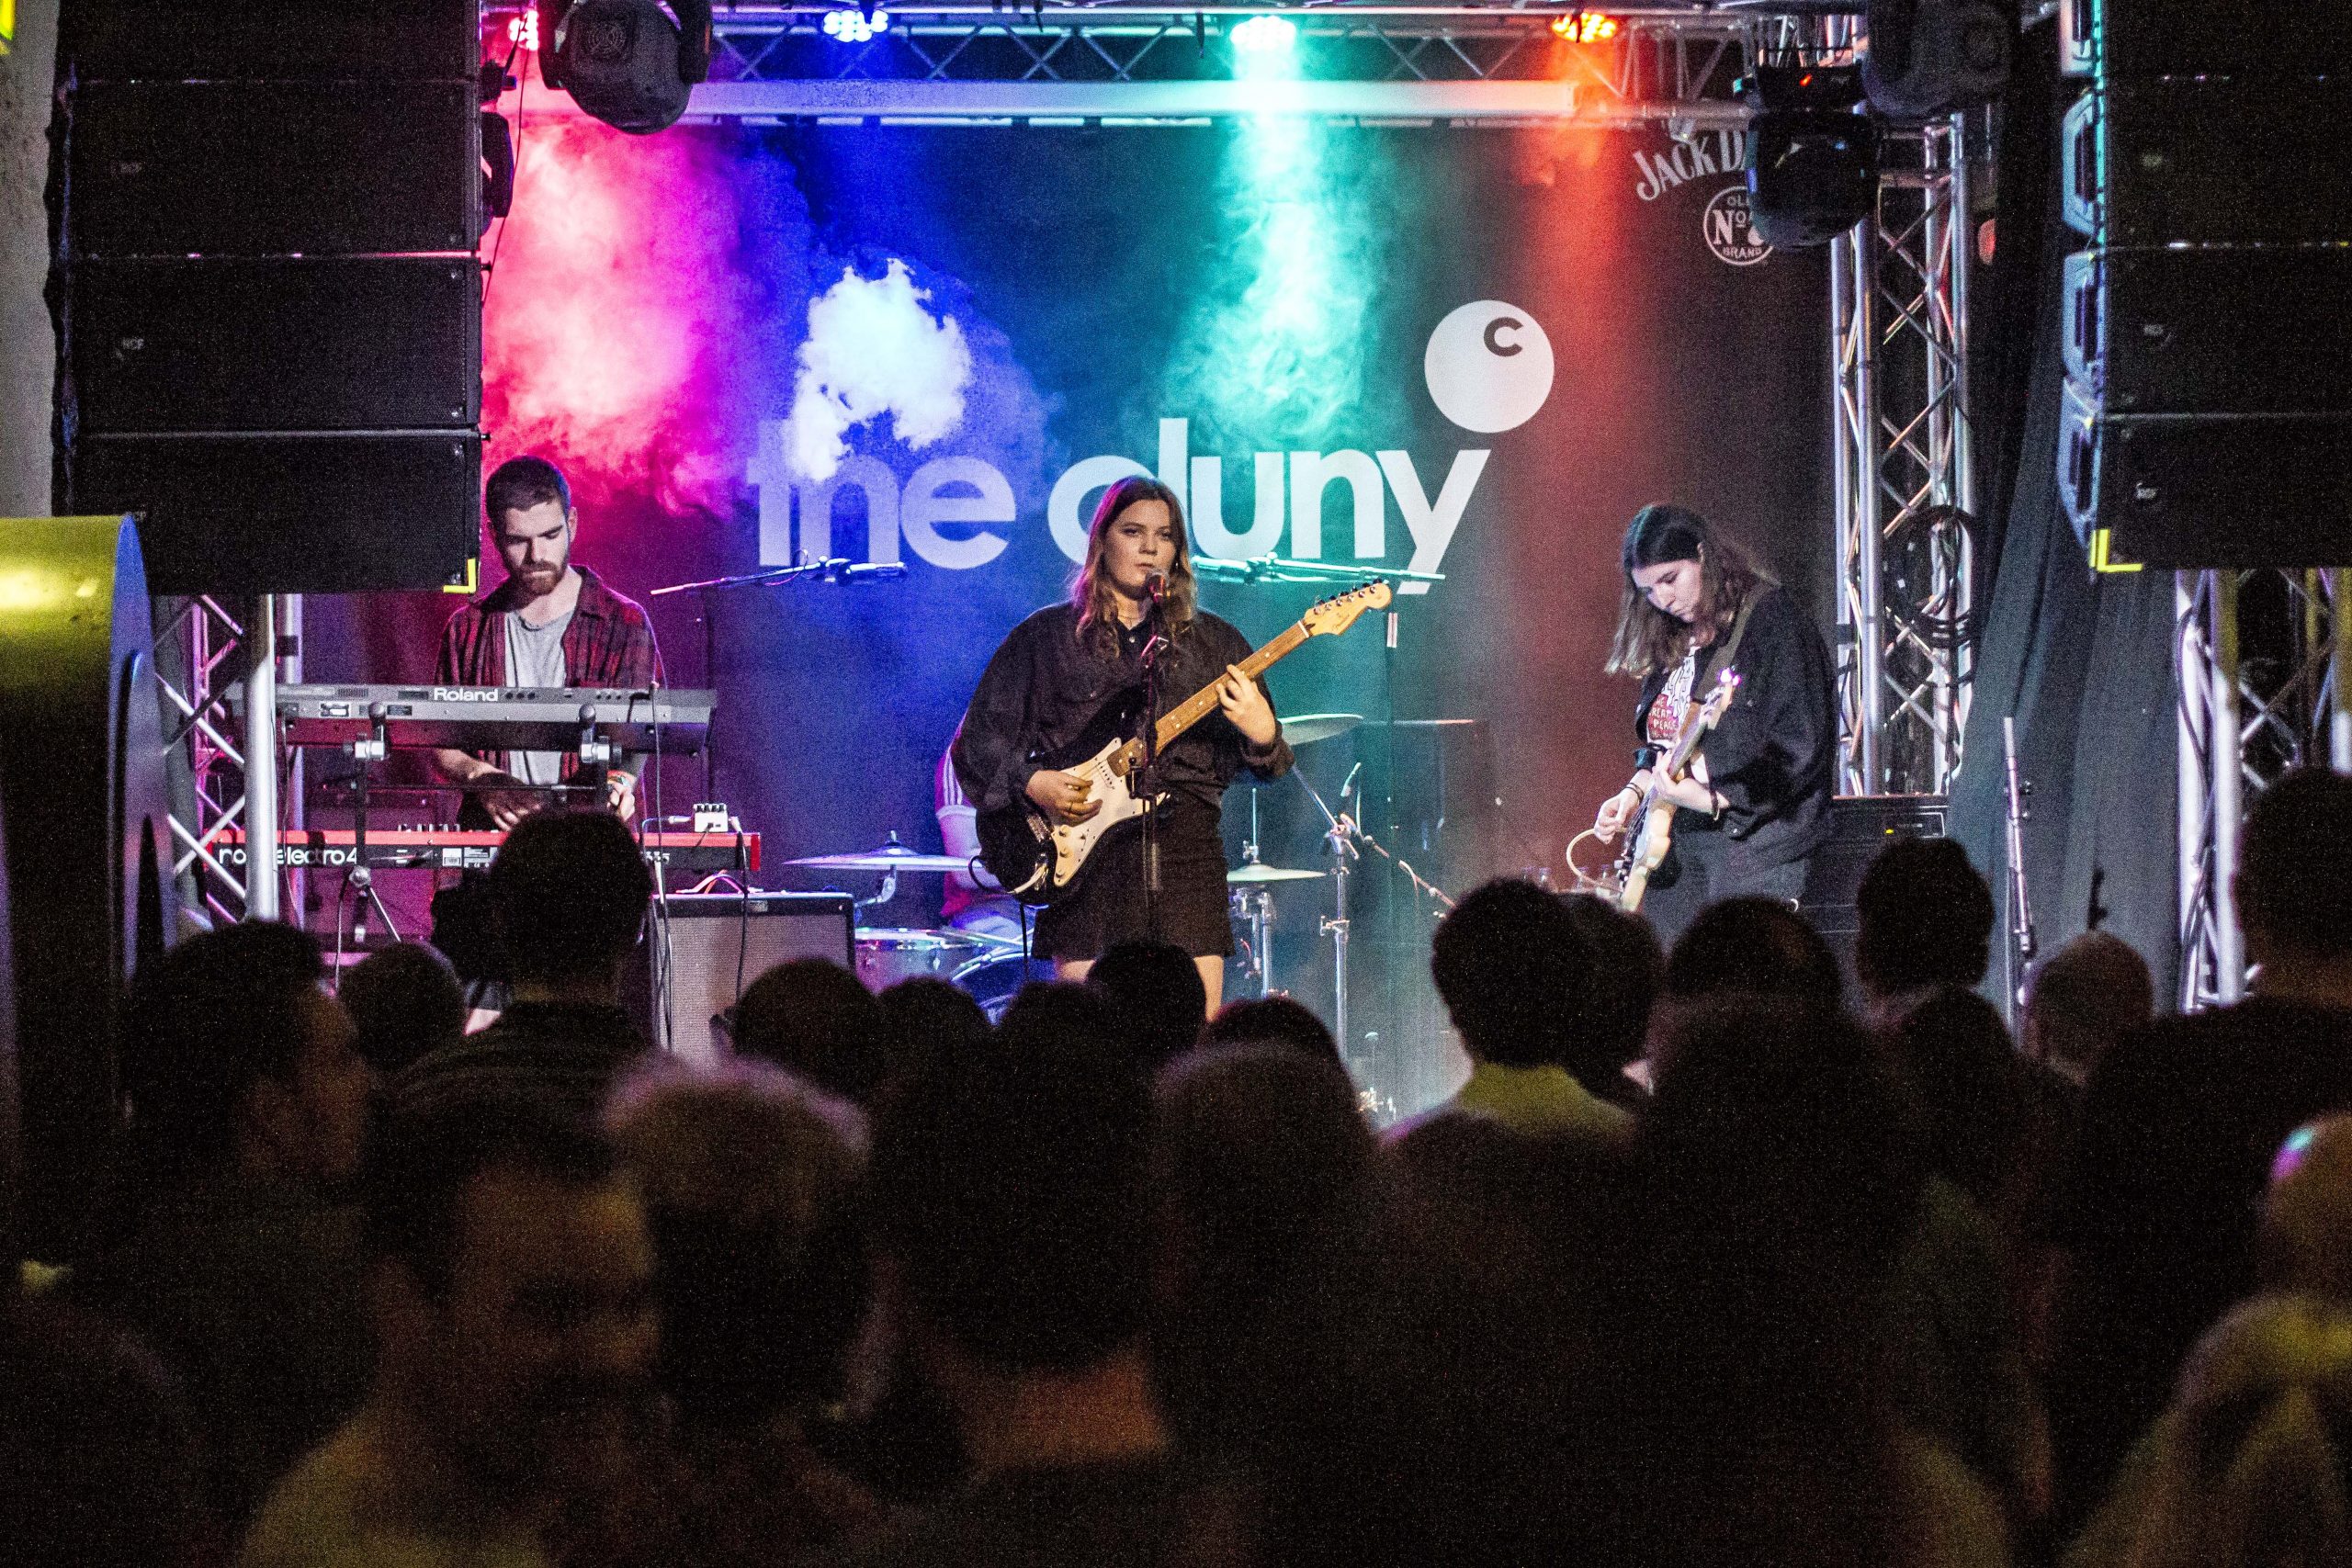 Brooke Bentham performing at the cluny at the Tipping Point Live 2019 music festival